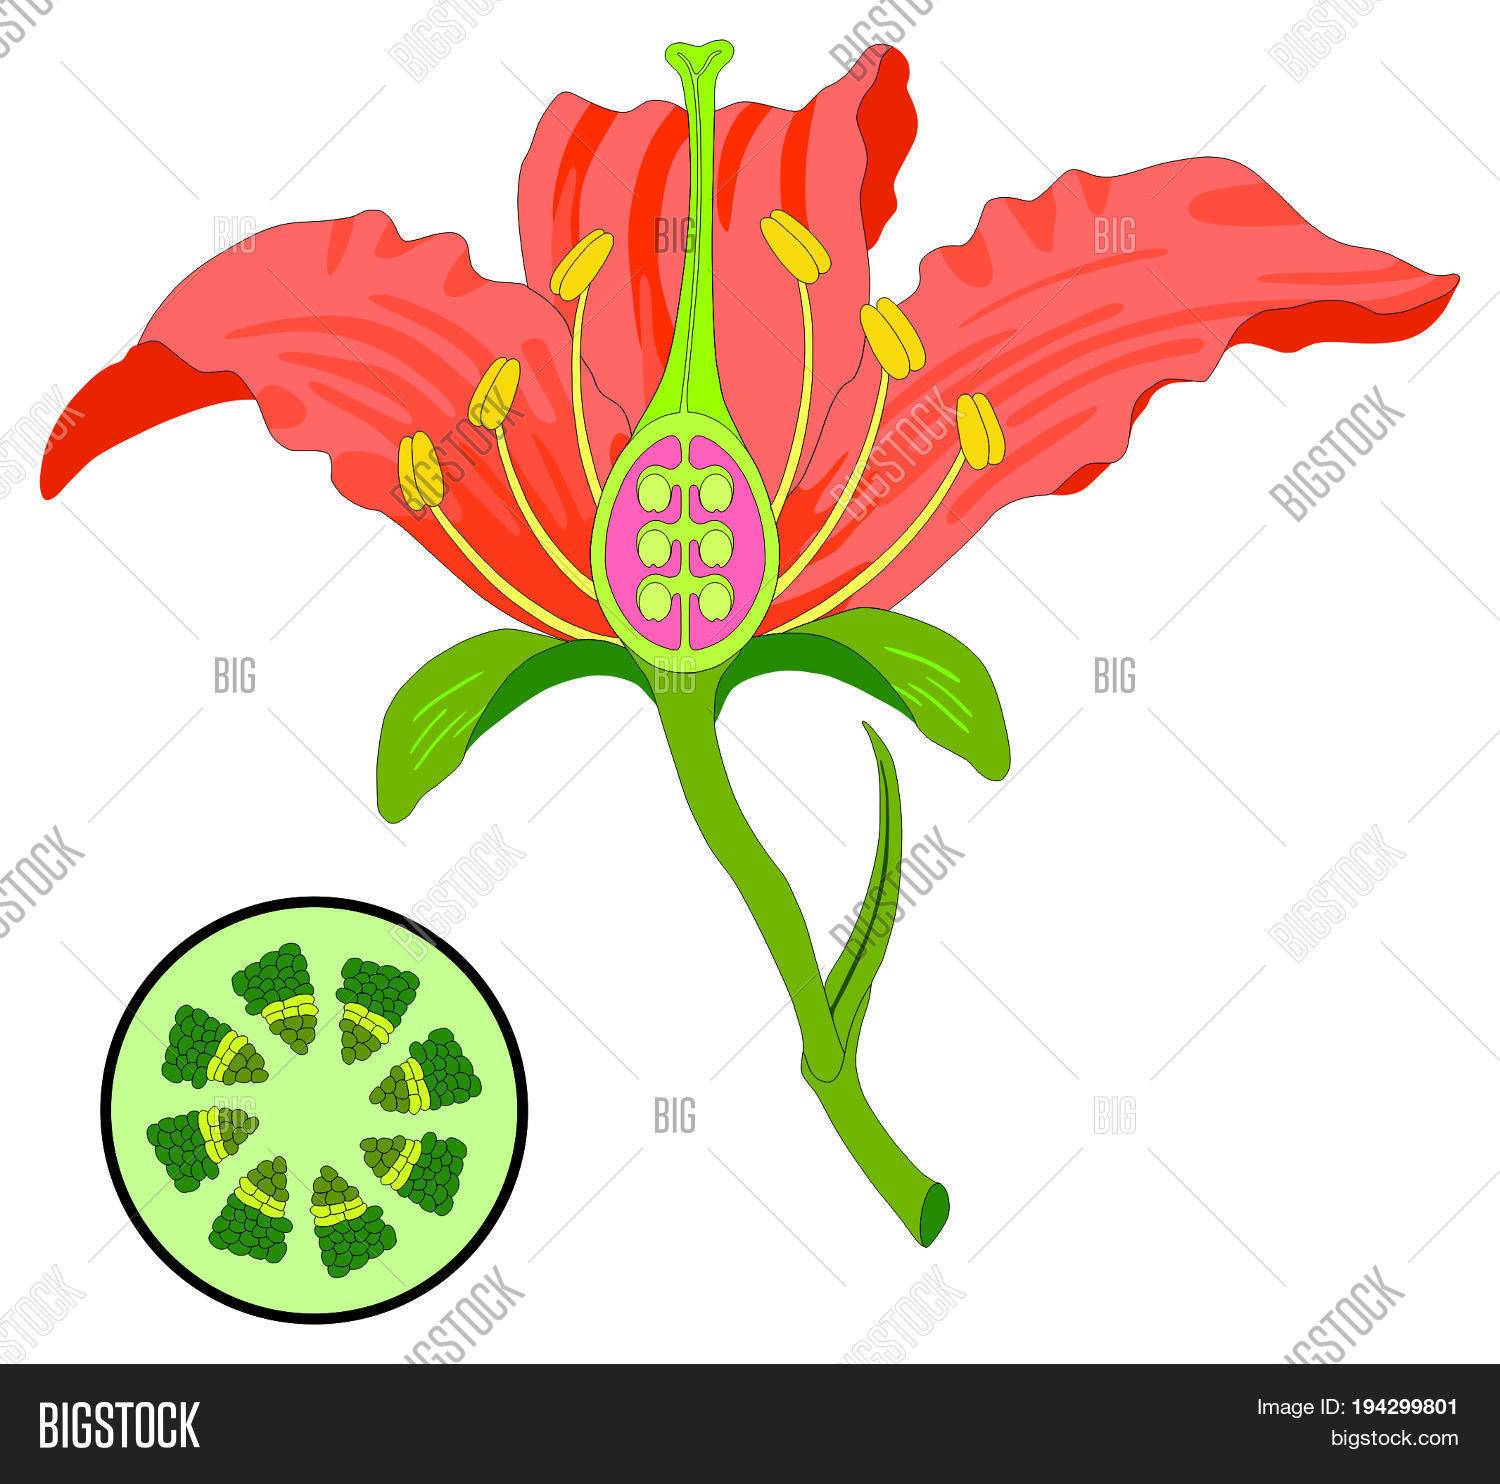 Diagram Of A Flower Flower Parts Diagram Image Photo Free Trial Bigstock